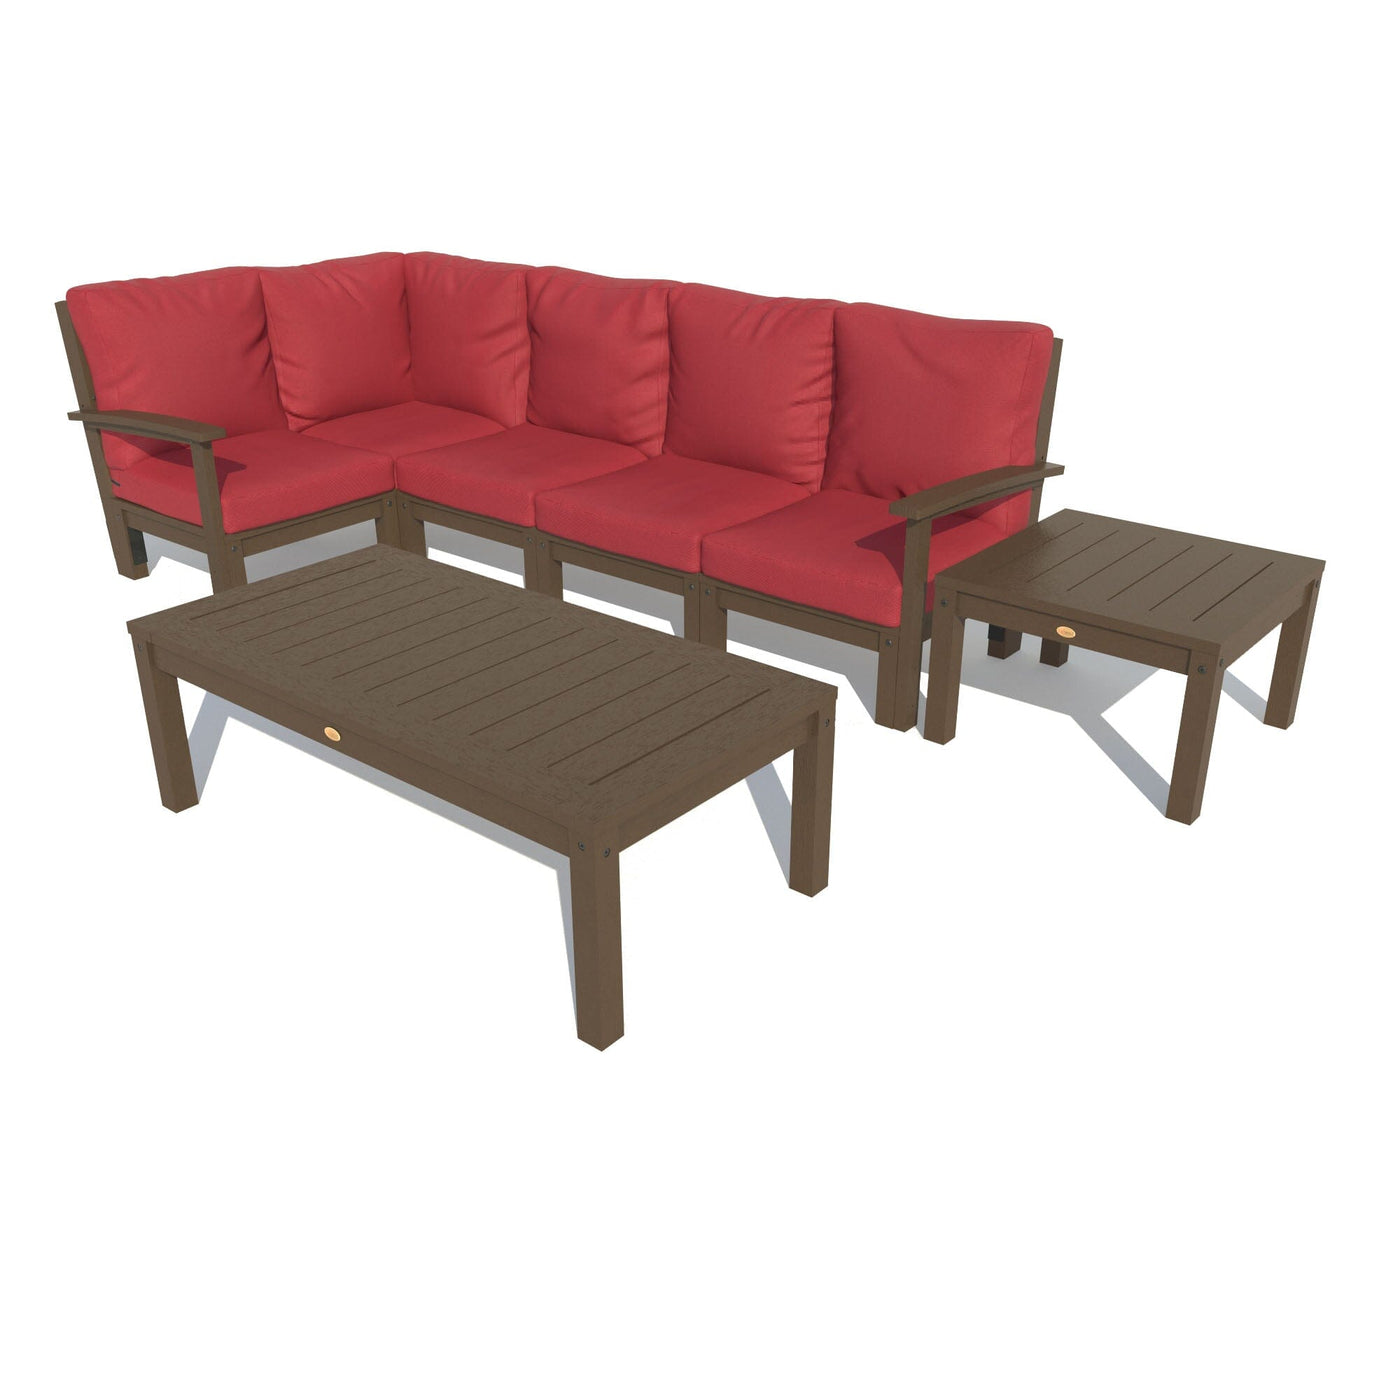 Bespoke Deep Seating: 7 Piece Sectional Set with Conversation and Side Table Deep Seating Highwood USA Firecracker Red Weathered Acorn 